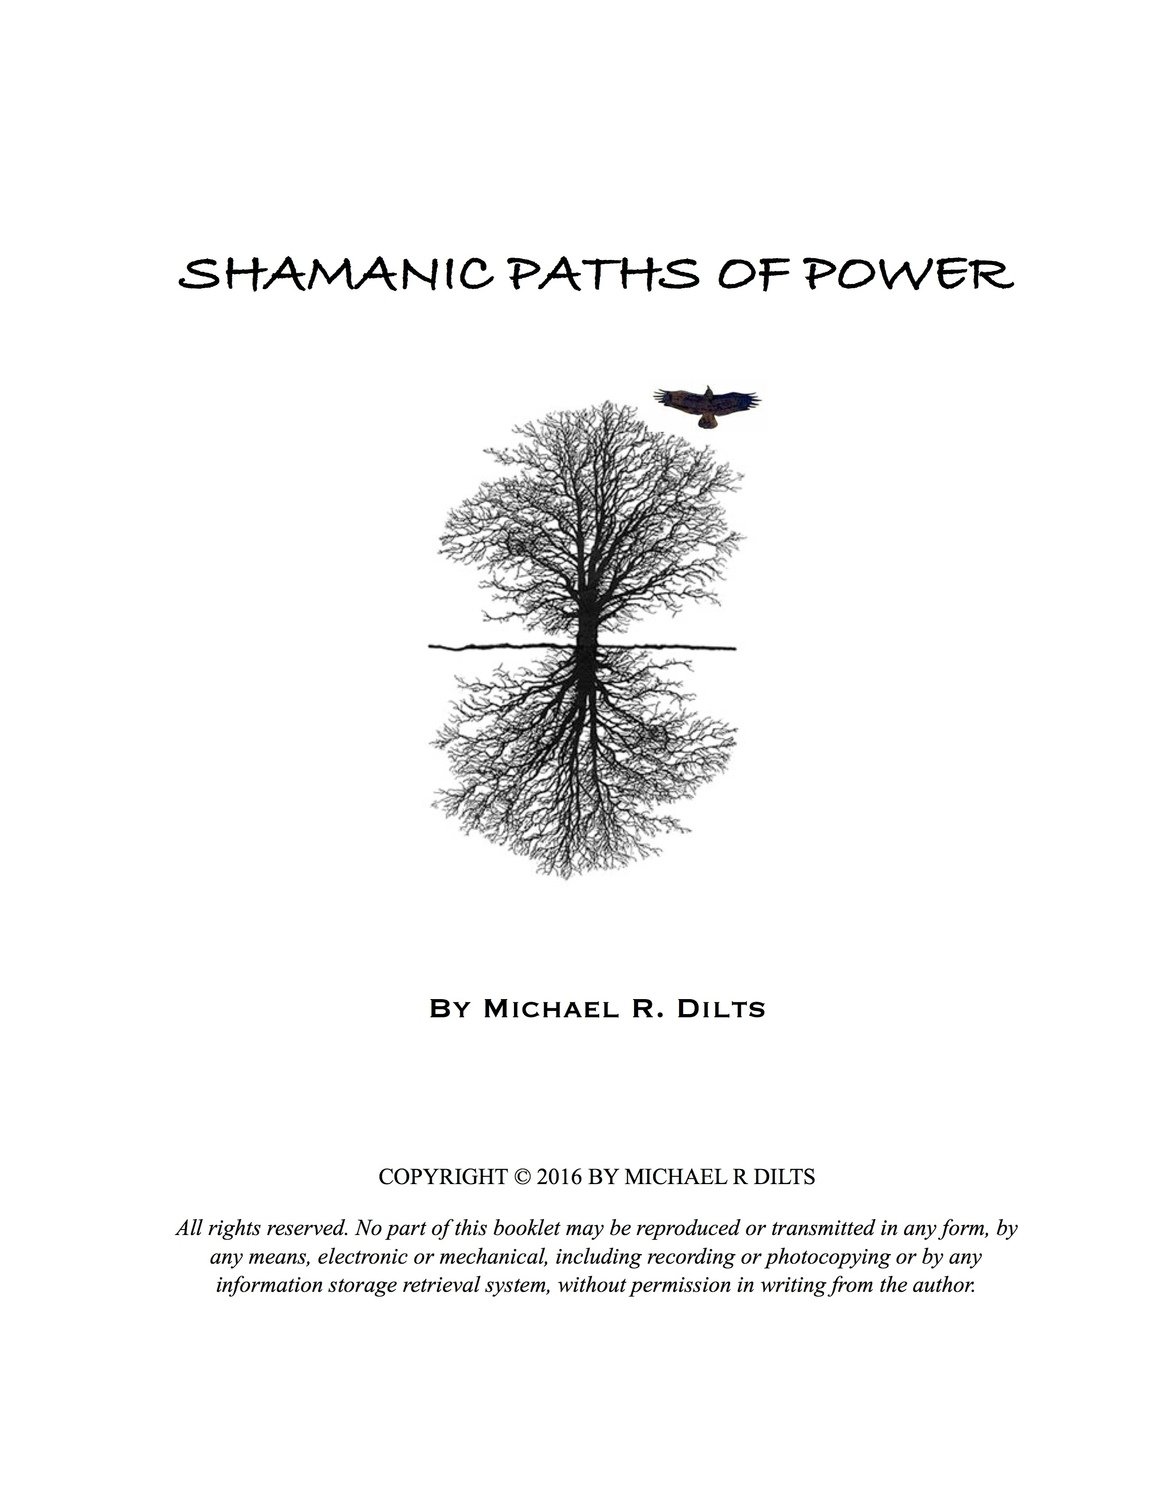 Shamanic Paths of Power by Michael R. Dilts [Booklet]